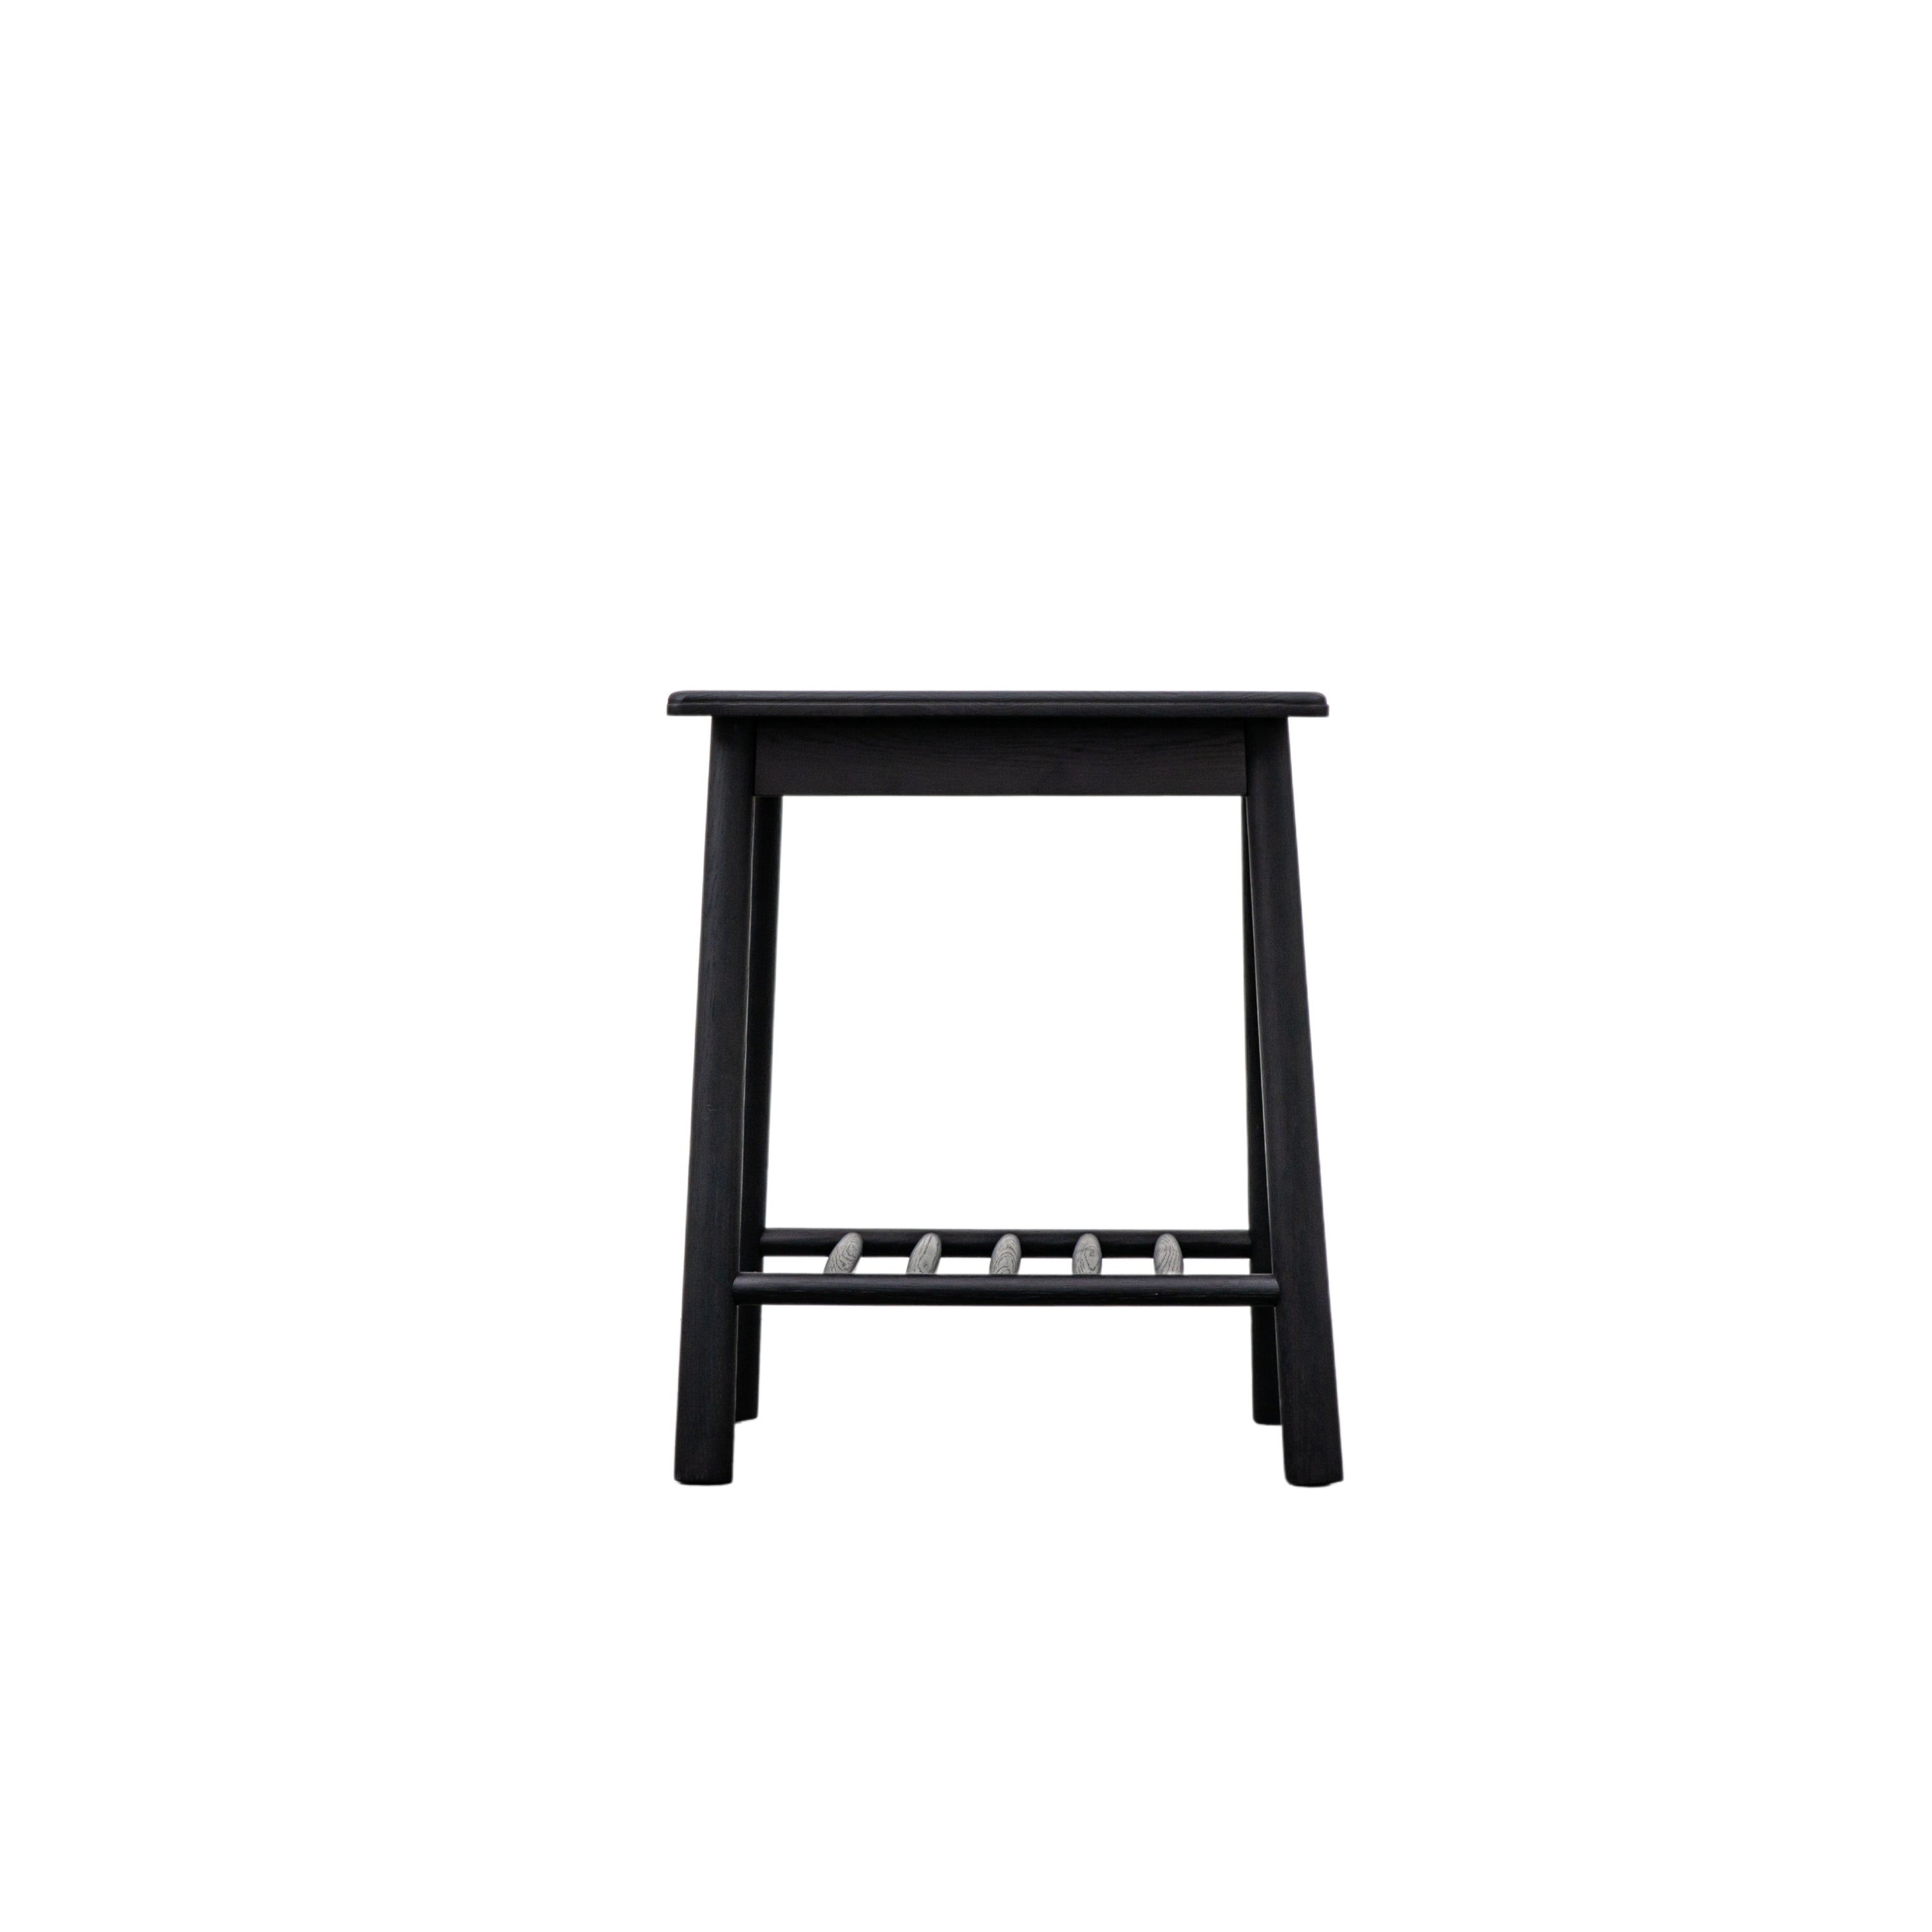 AXEL Nordic side table in black with spindle lower shelf | MalletandPlane.com